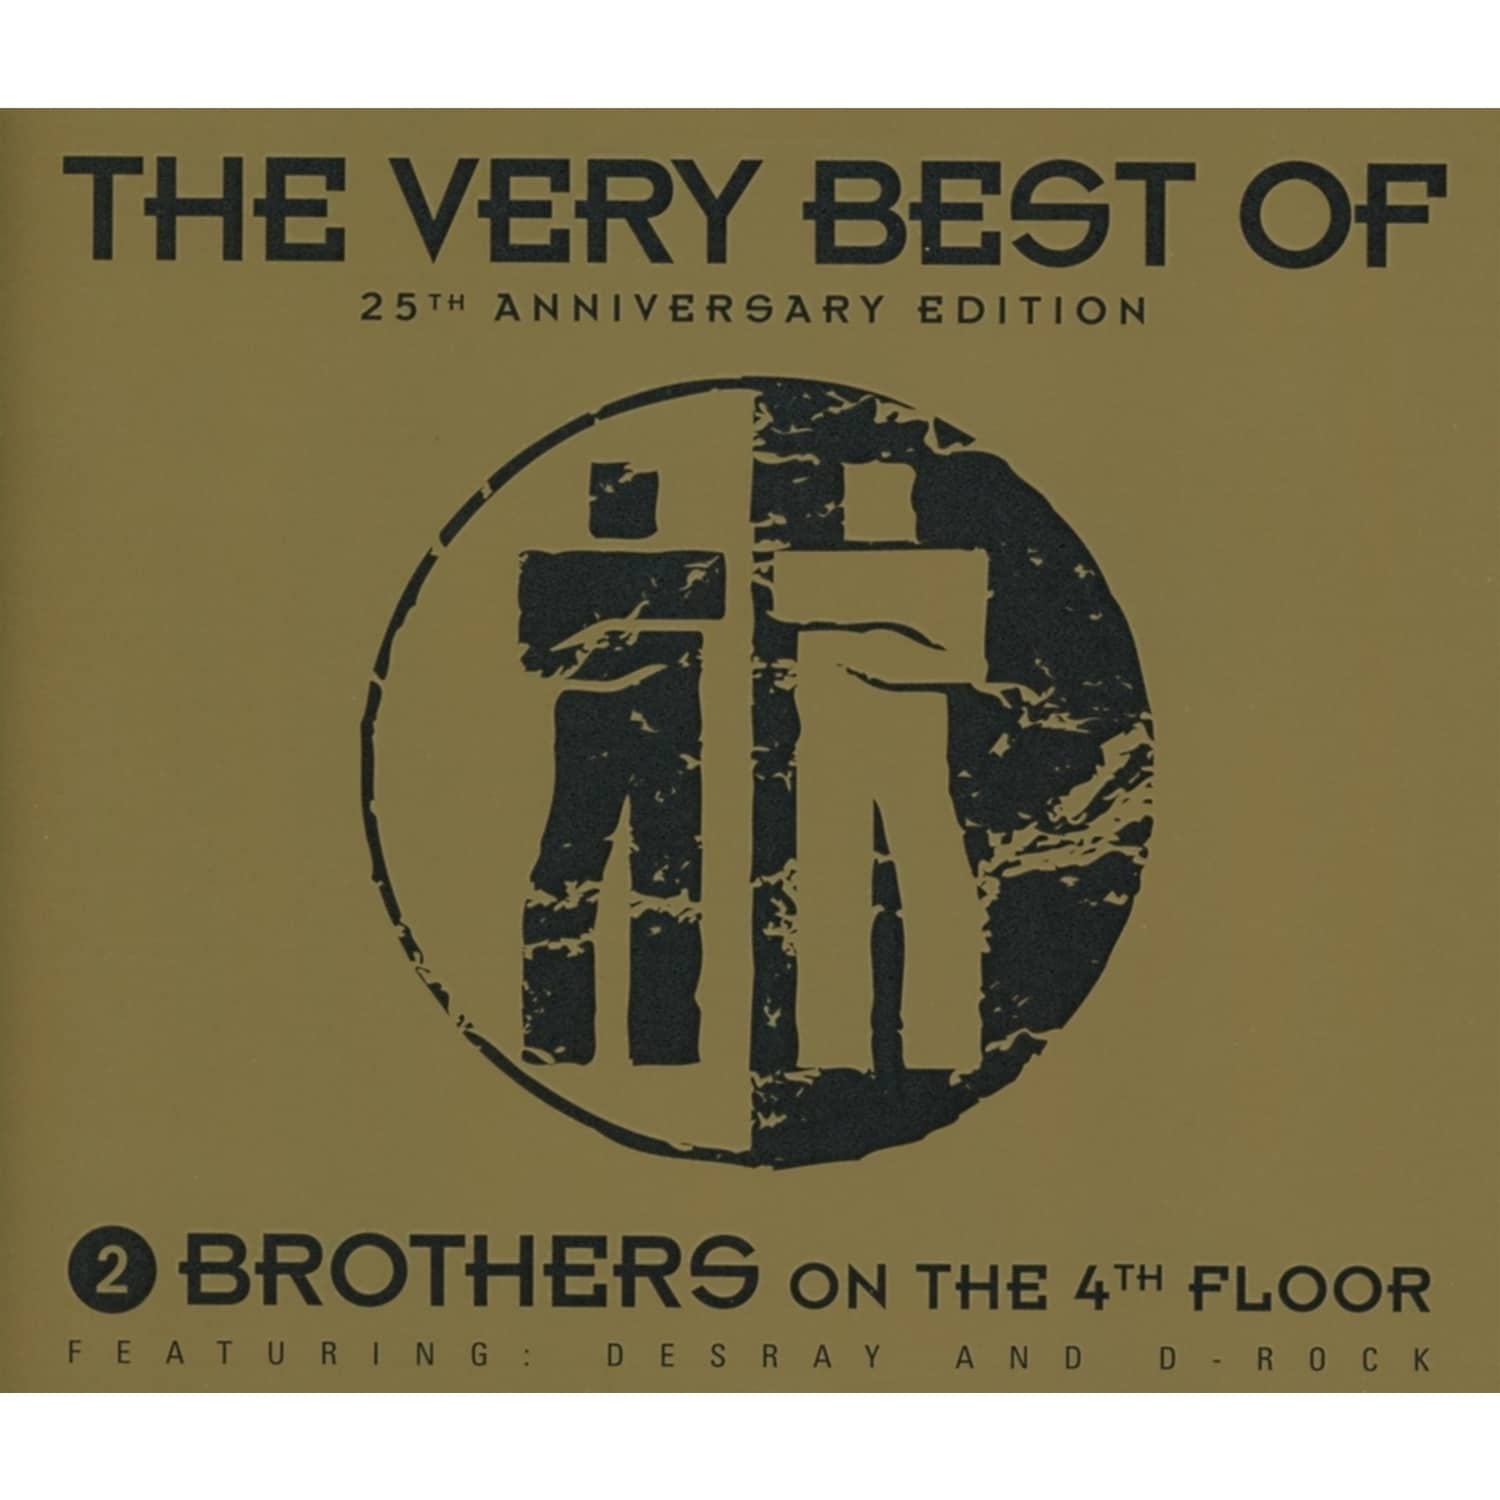 2 Brothers On The 4th Floor - THE VERY BEST OF 